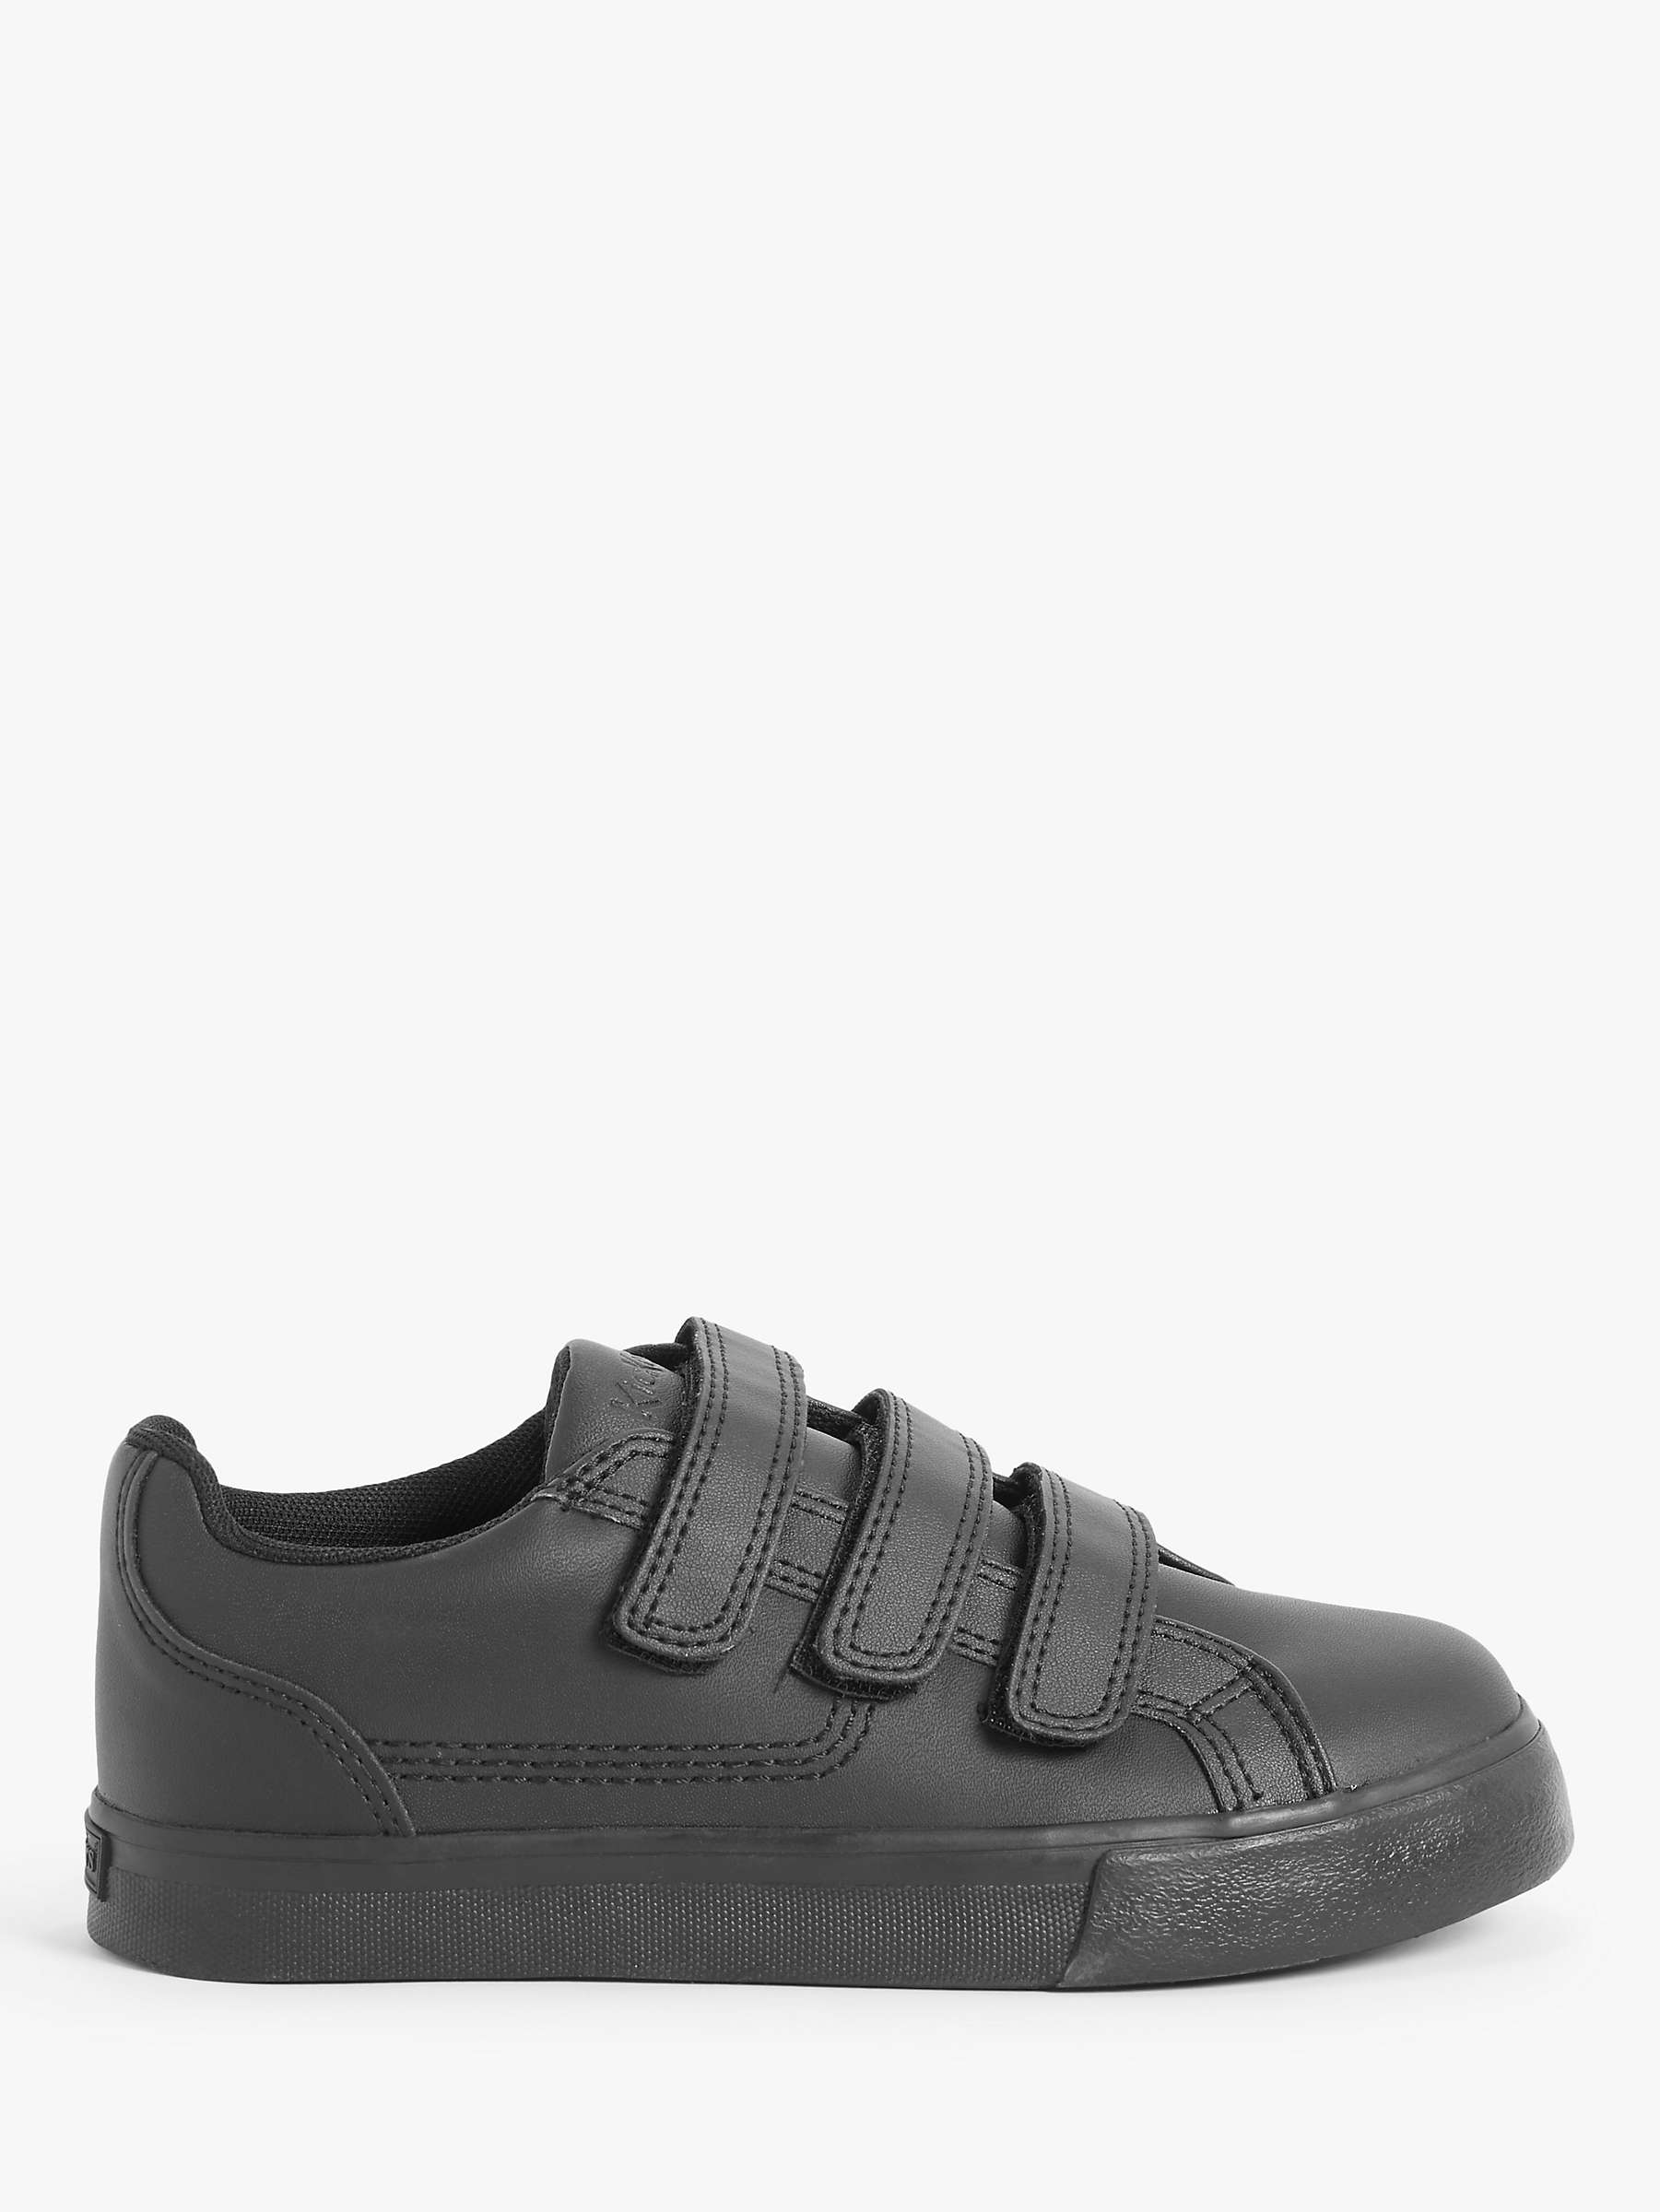 BN BOYS KICKERS TOVNI TRIP BLACK LEATHER SHOES TRAINERS SCHOOL TOUCH FASTEN KIDS 